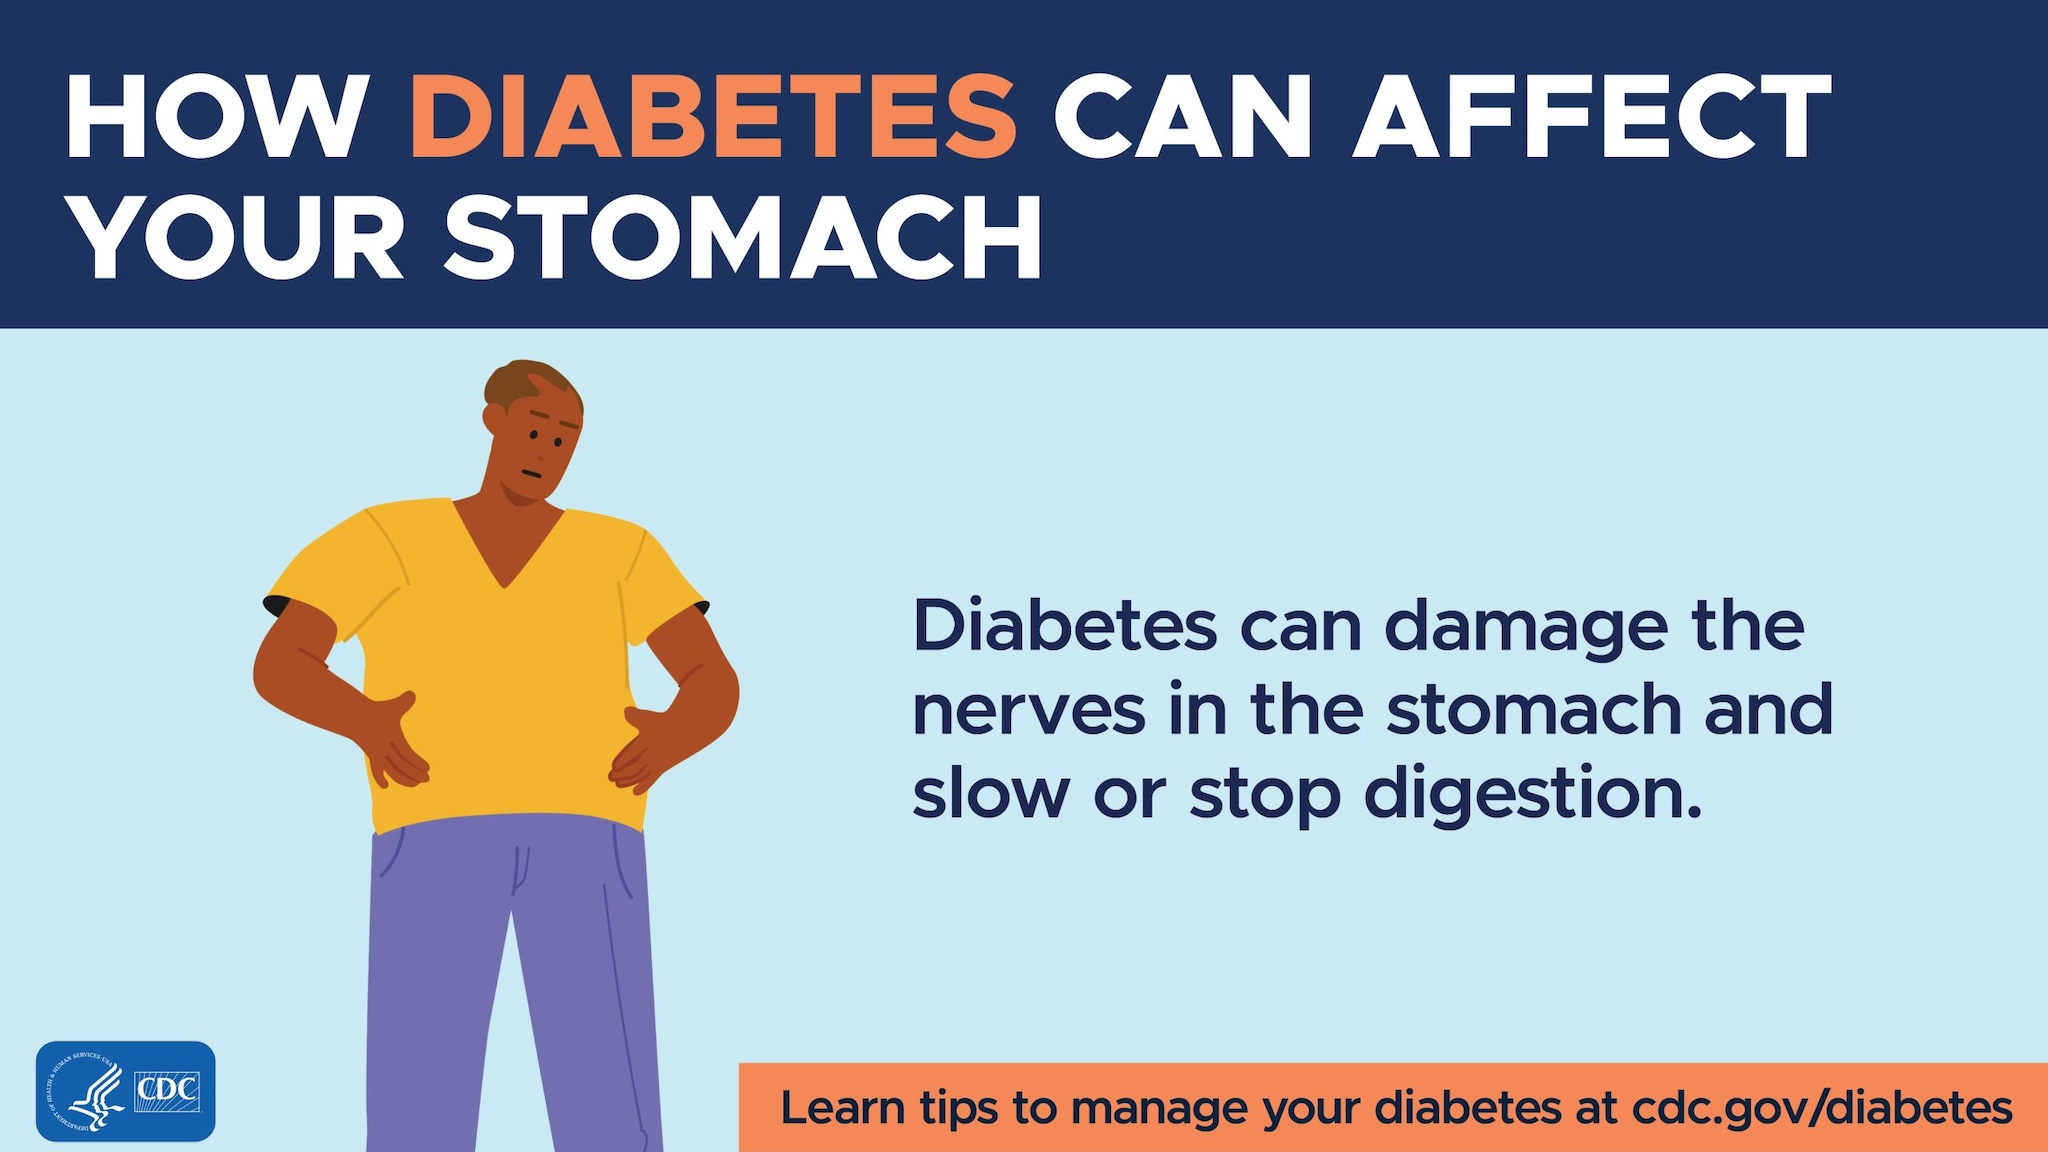 Diabetes can damage the nerves in the stomach and slow or stop digestion